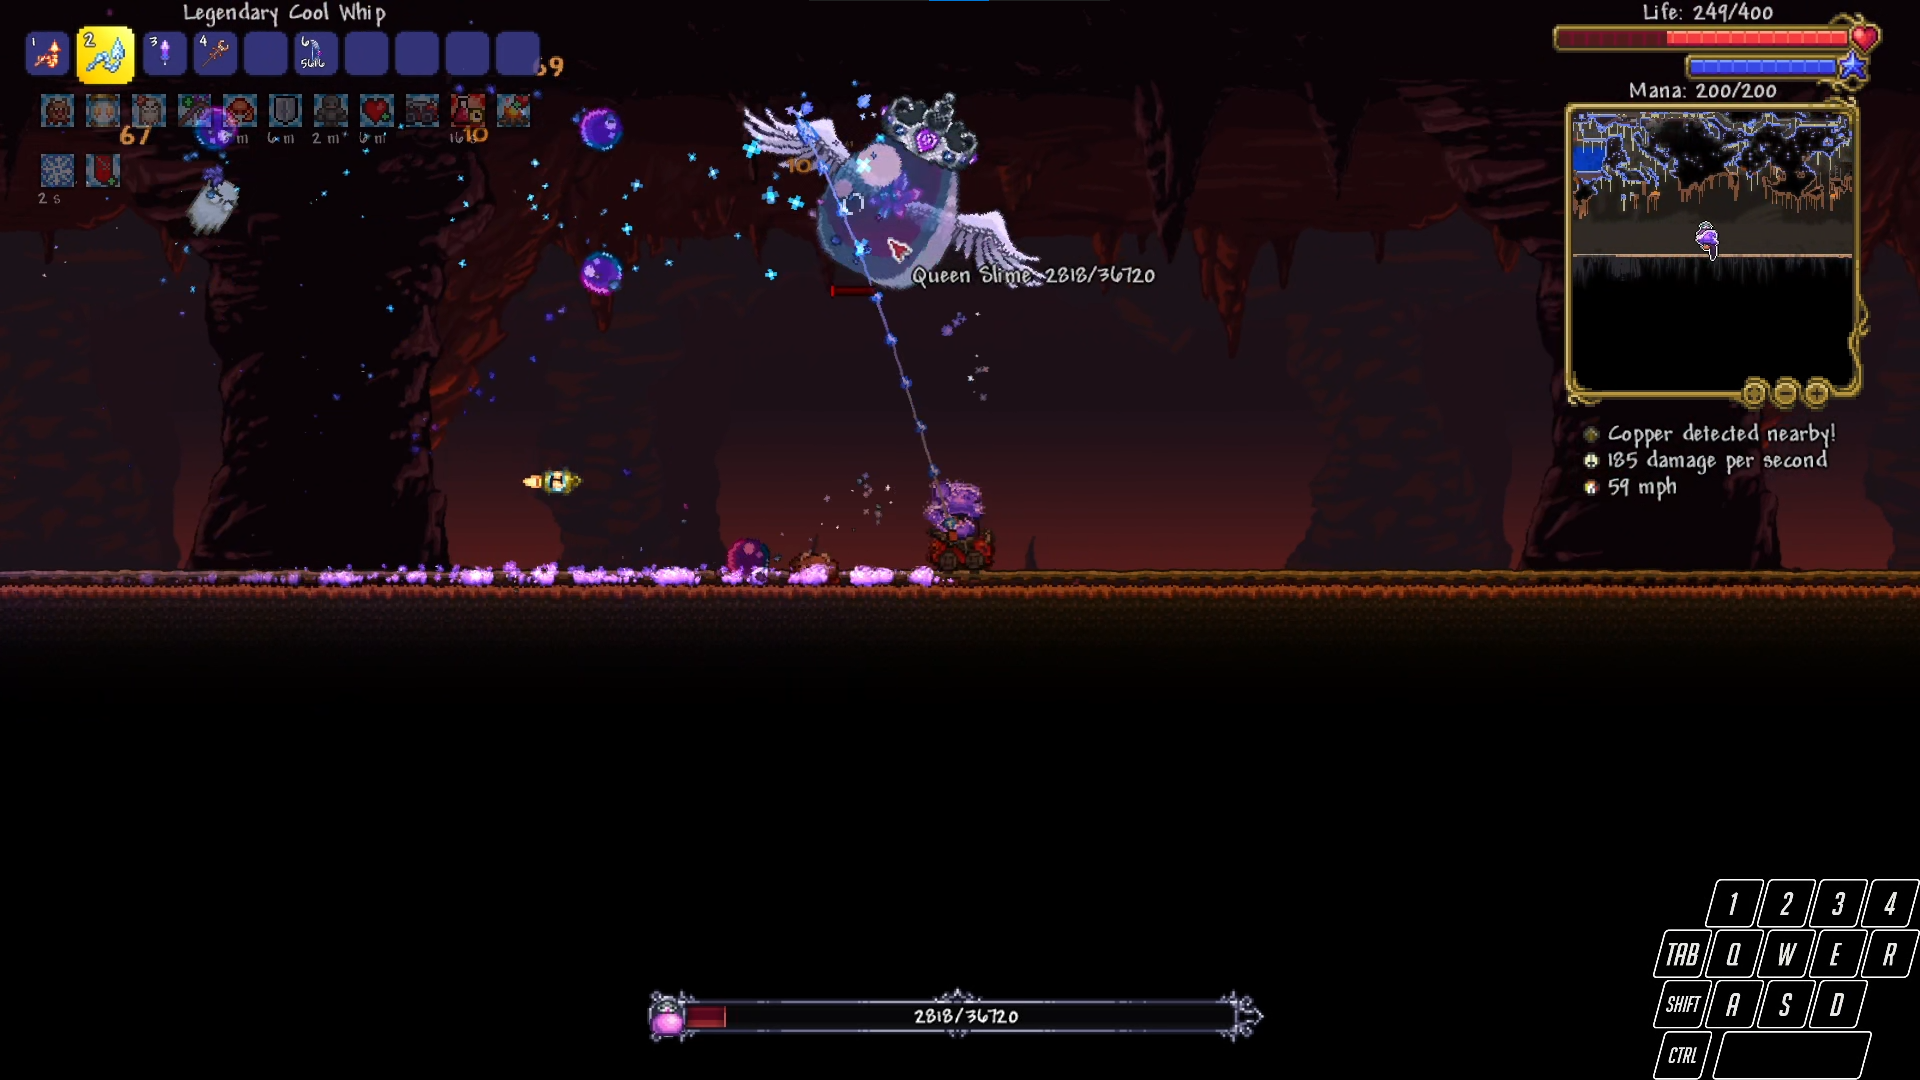 Player on a moving minecart, hitting qs with a whip, while minions of player and projectiles from qs are left behind.